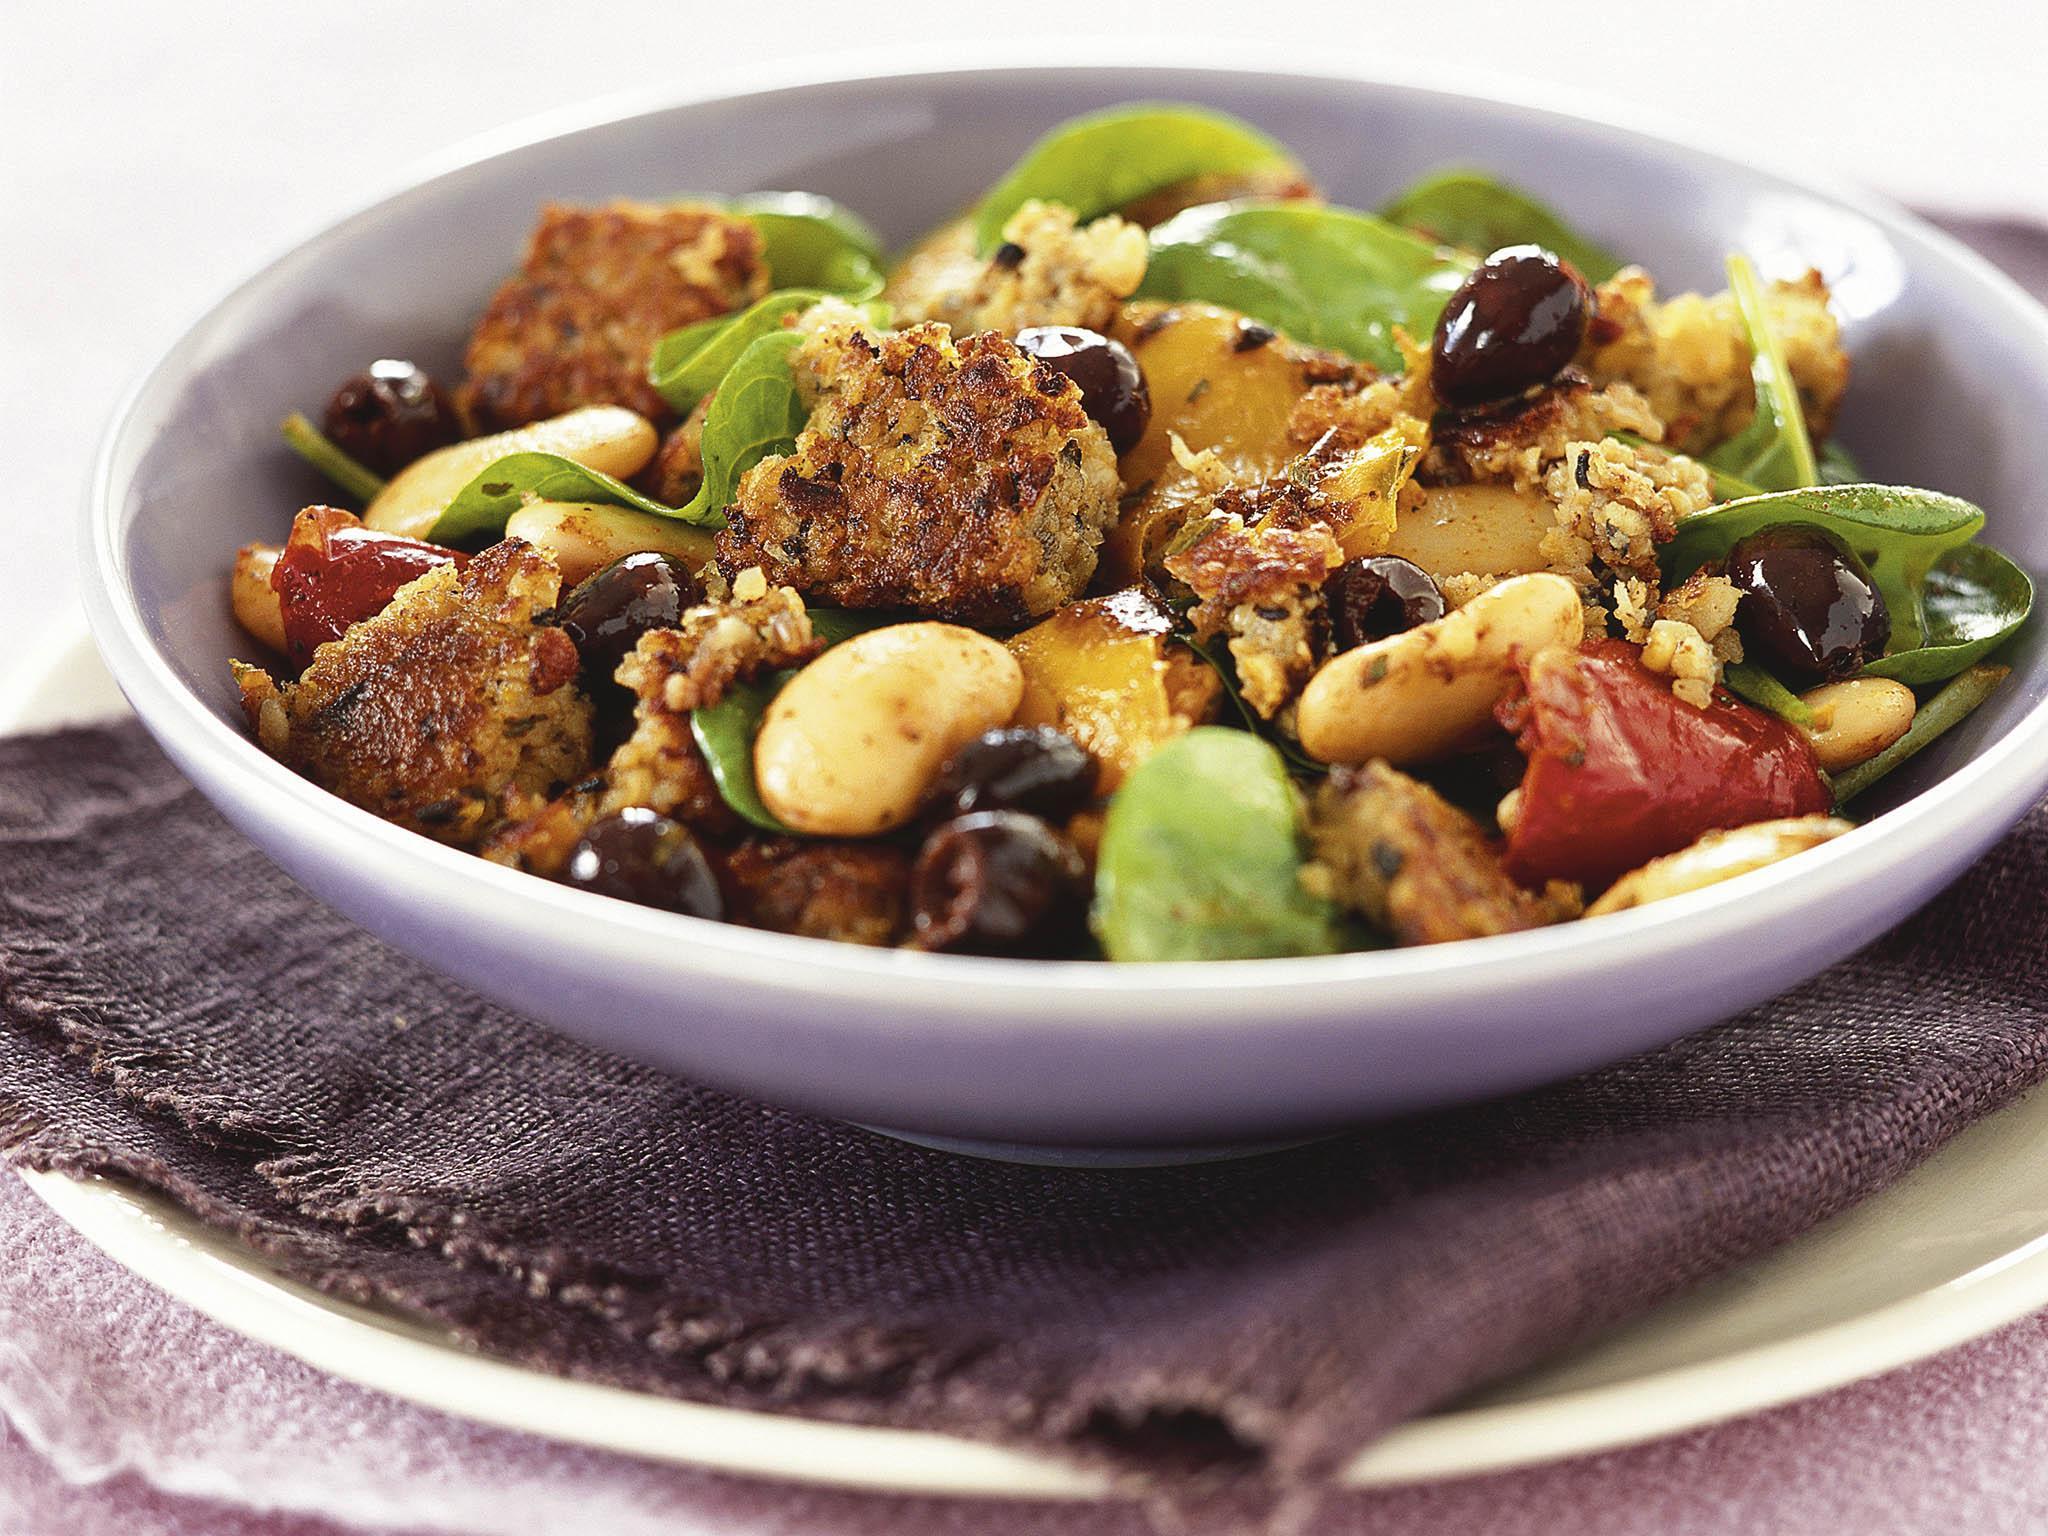 A colourful salad with butter beans makes for a lighter twist on the usual stodgy fare